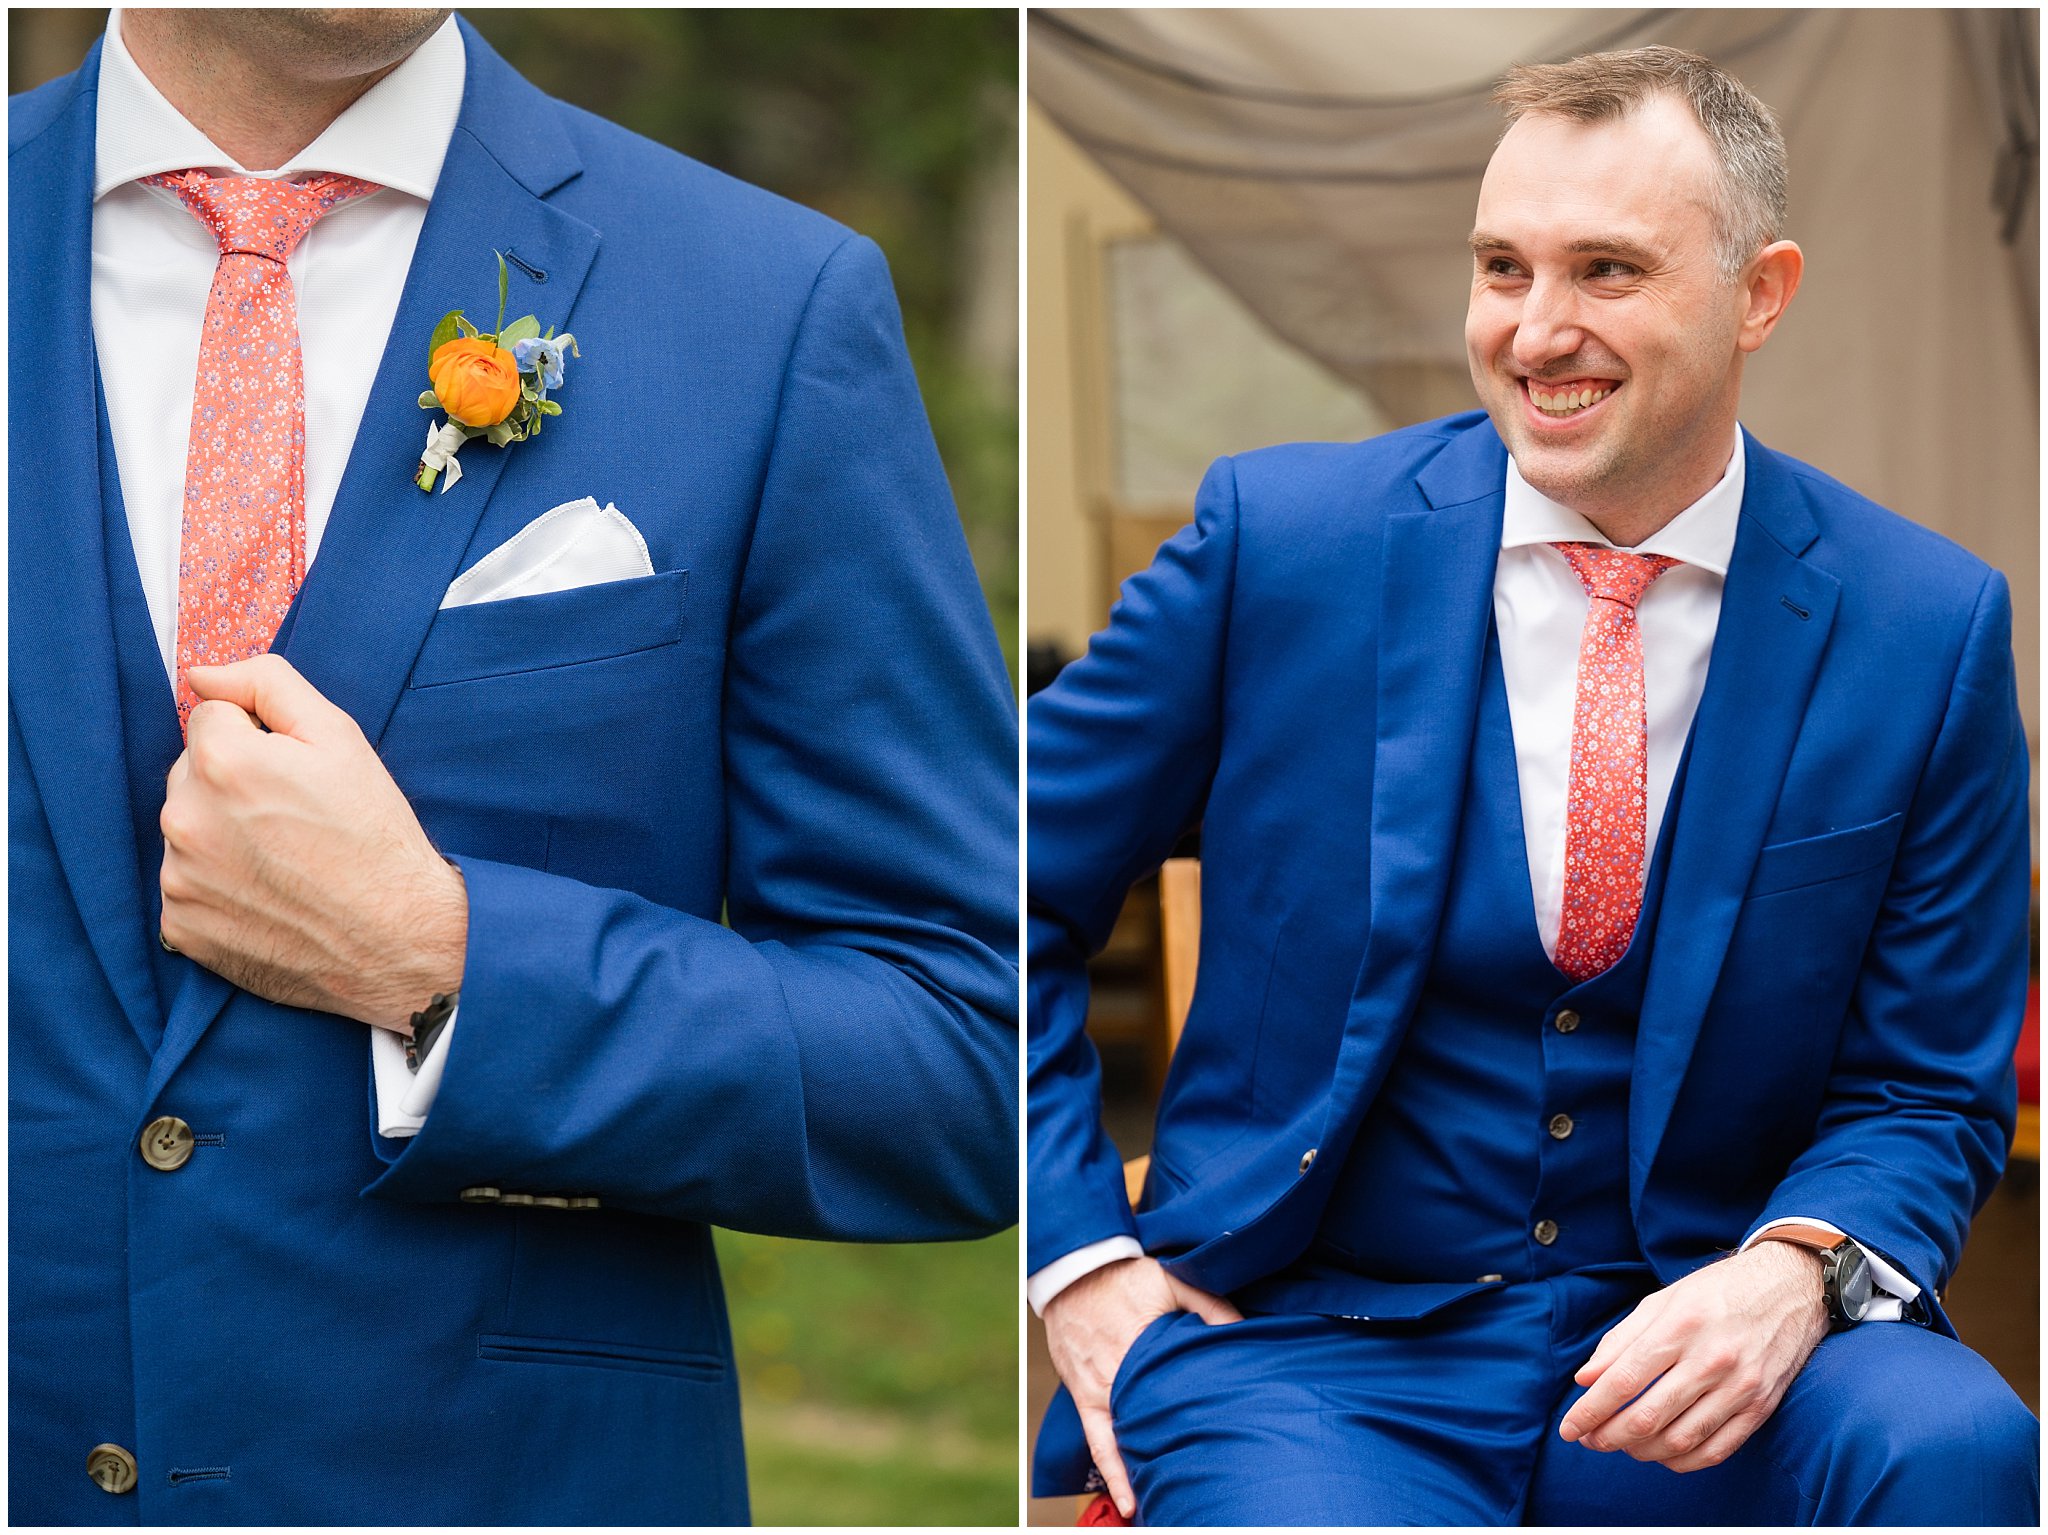 Groom and groomsmen in blue suits with coral ties getting ready outside canvas tent | Mountainside Weddings Kalispell Montana Destination Wedding | Jessie and Dallin Photography